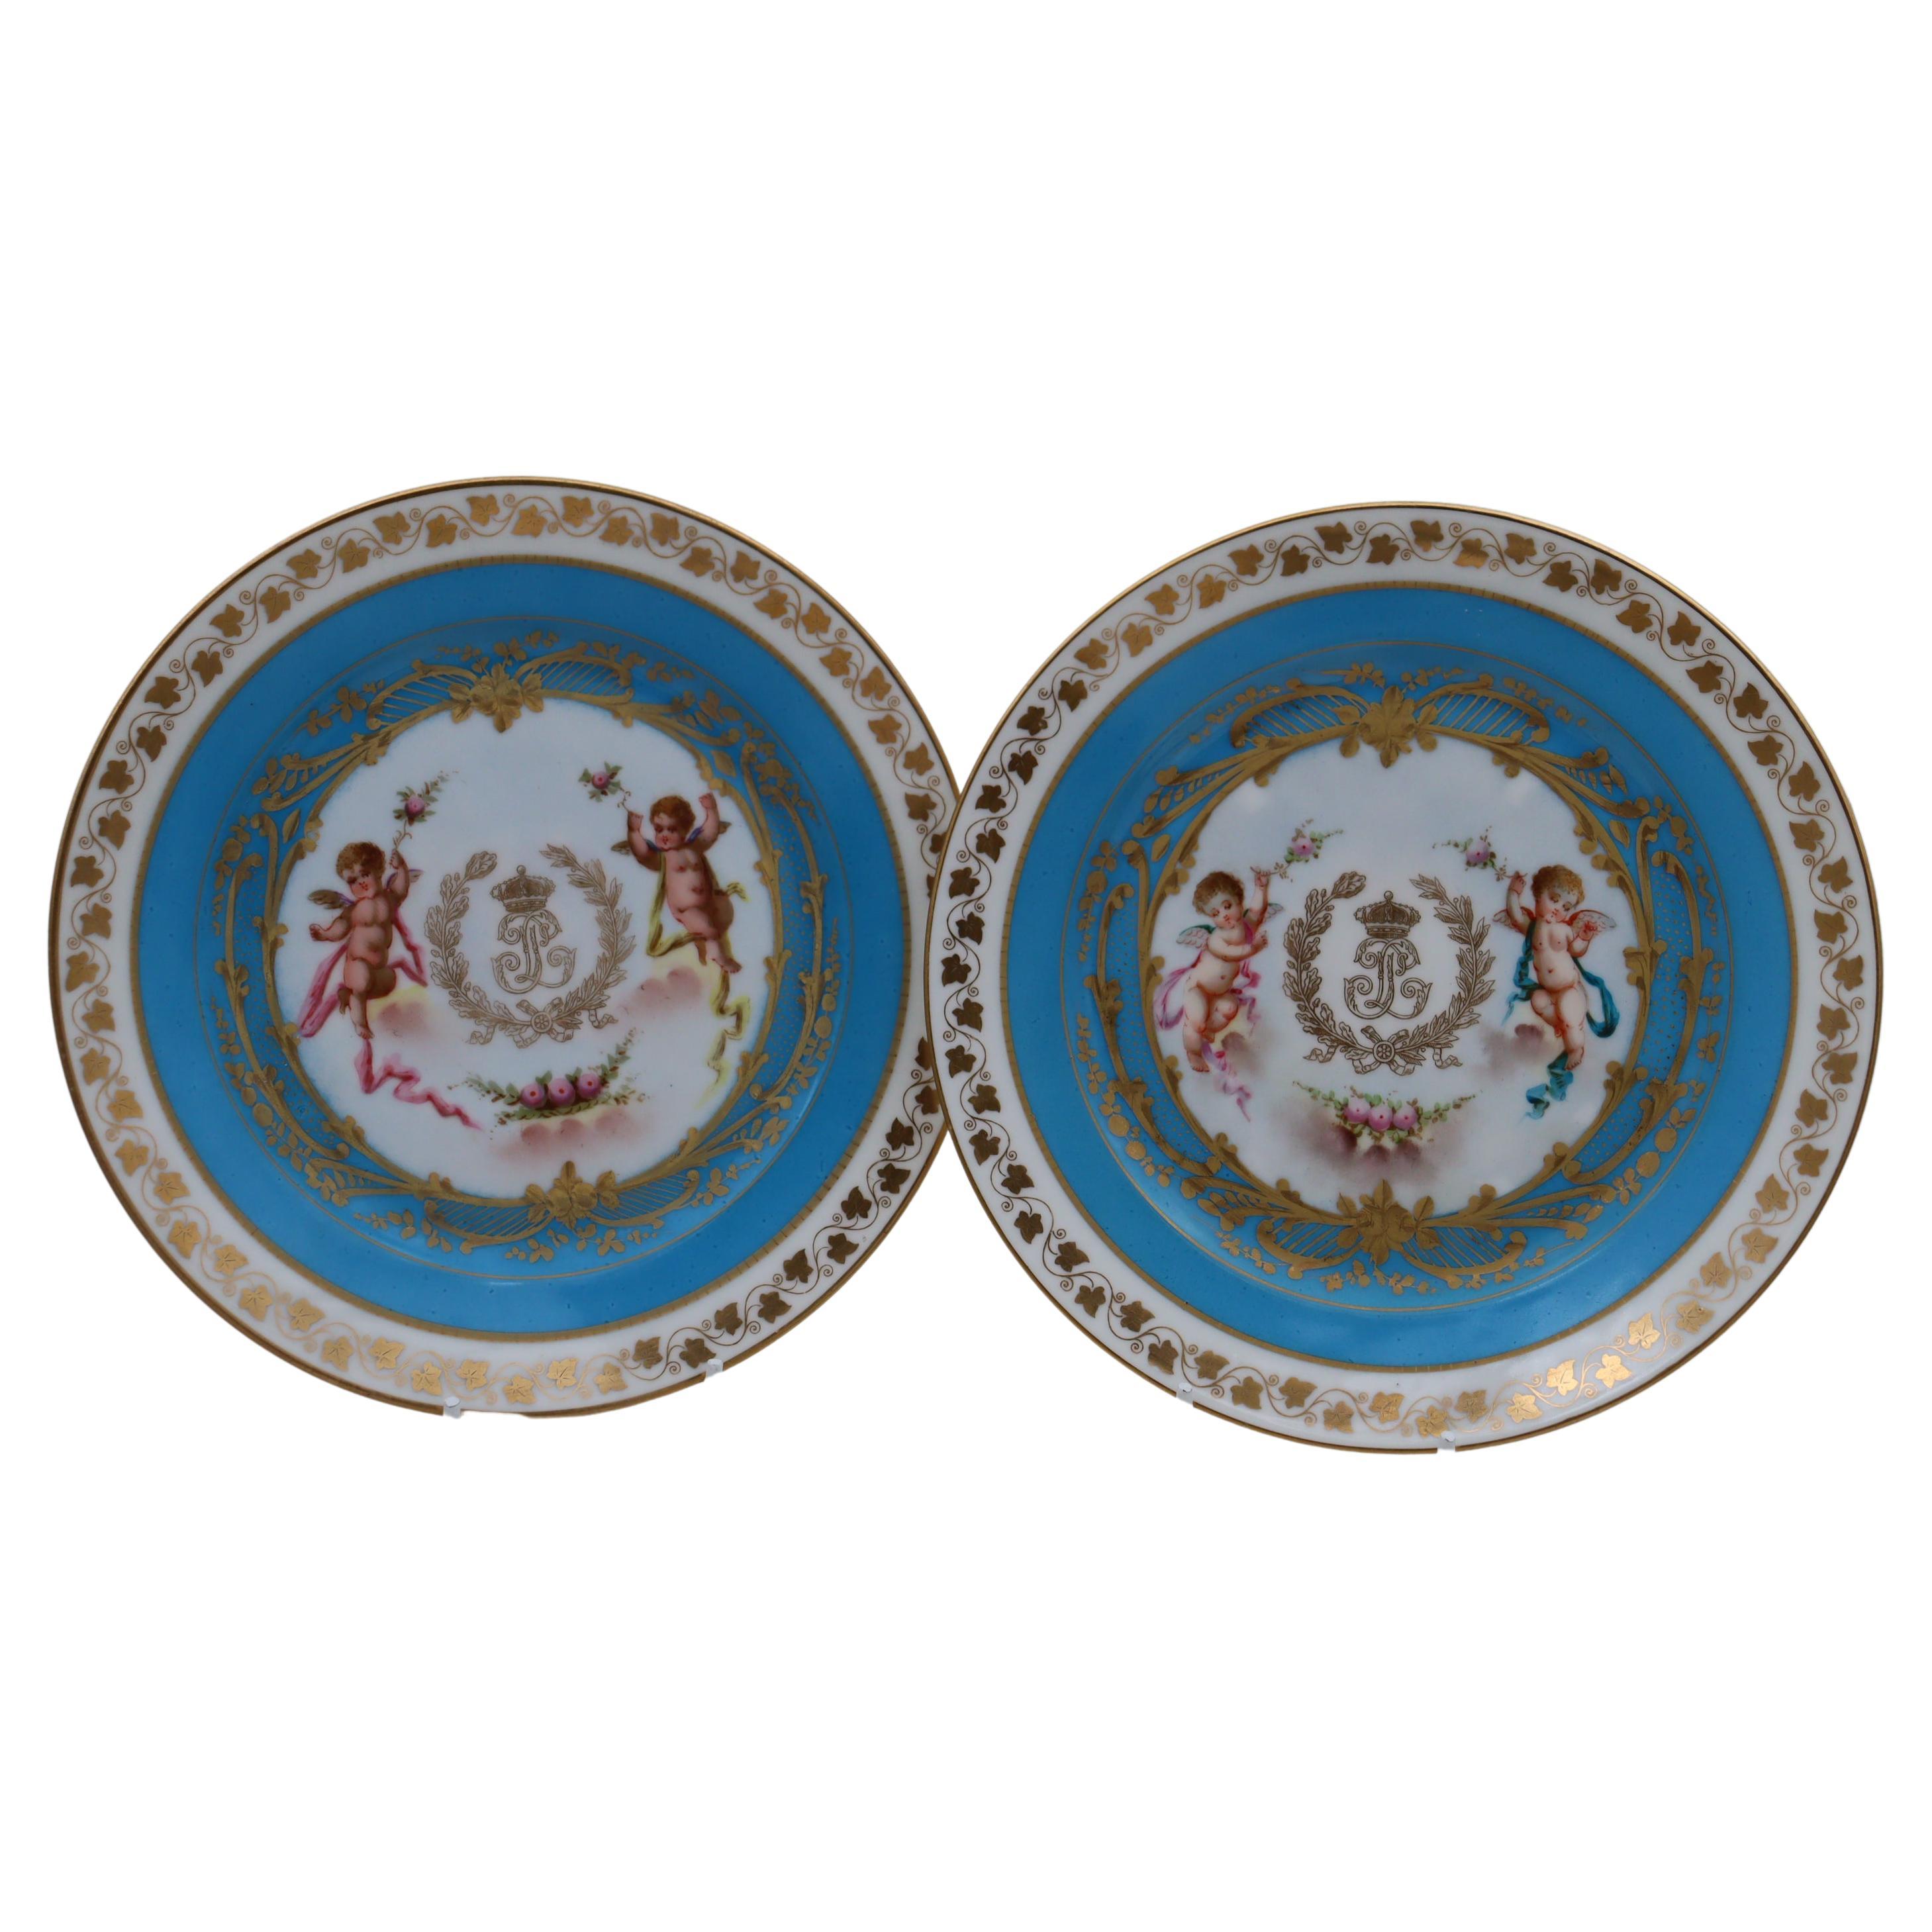 Pair of Sevres Louis Phillippe plates